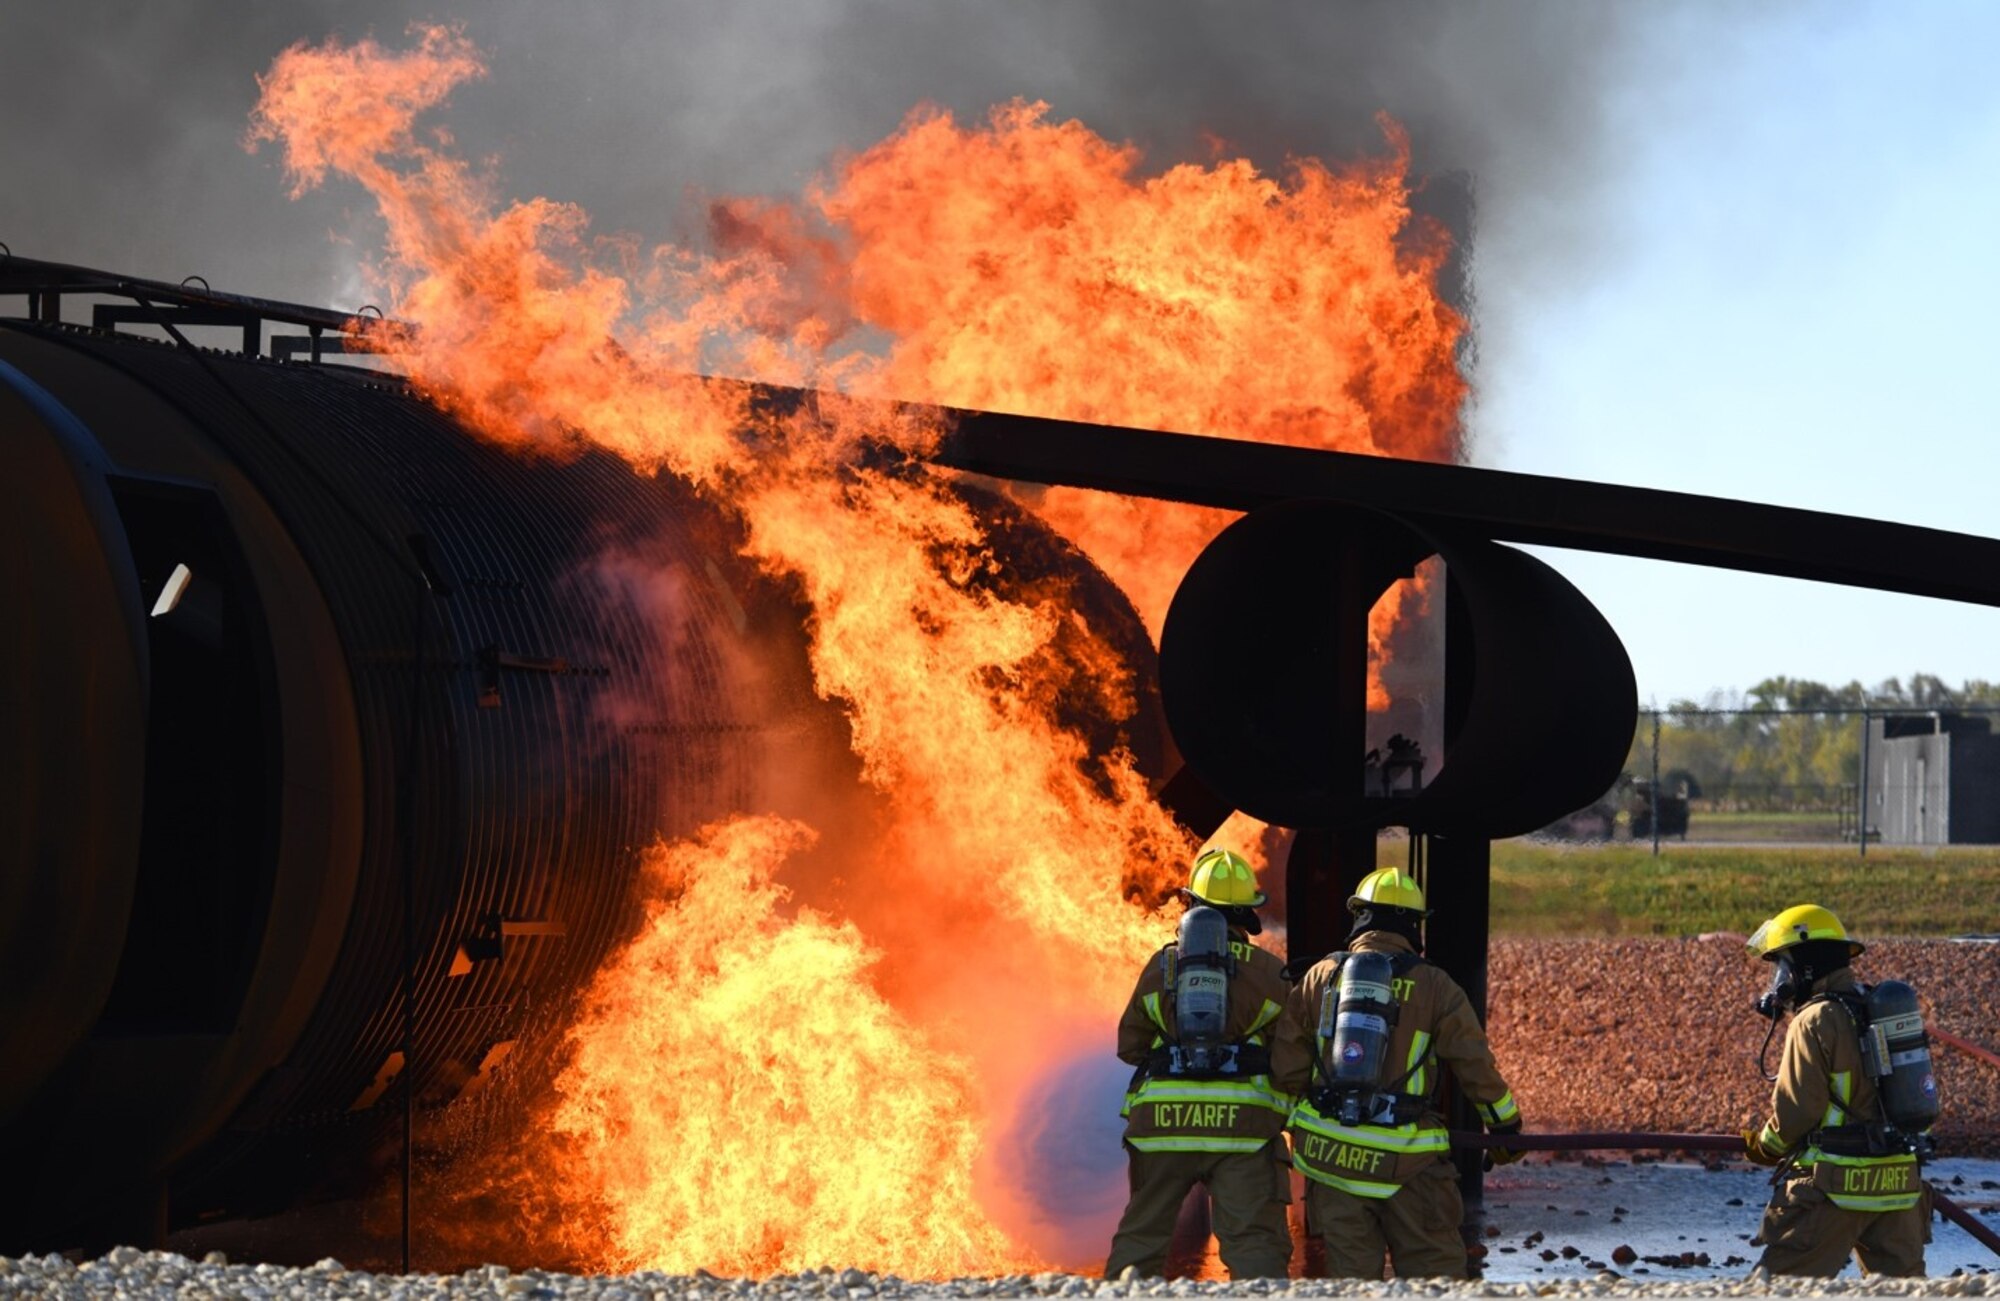 Firefighters from the Wichita Airport Police and Fire Department fight a ground fire on a large frame training aircraft Oct. 21, 2019, at McConnell Air Force Base, Kan. The two-hour training consisted of a total of 10 live simulated fires. (U.S. Air Force photo by Airman 1st Class Nilsa E. Garcia)